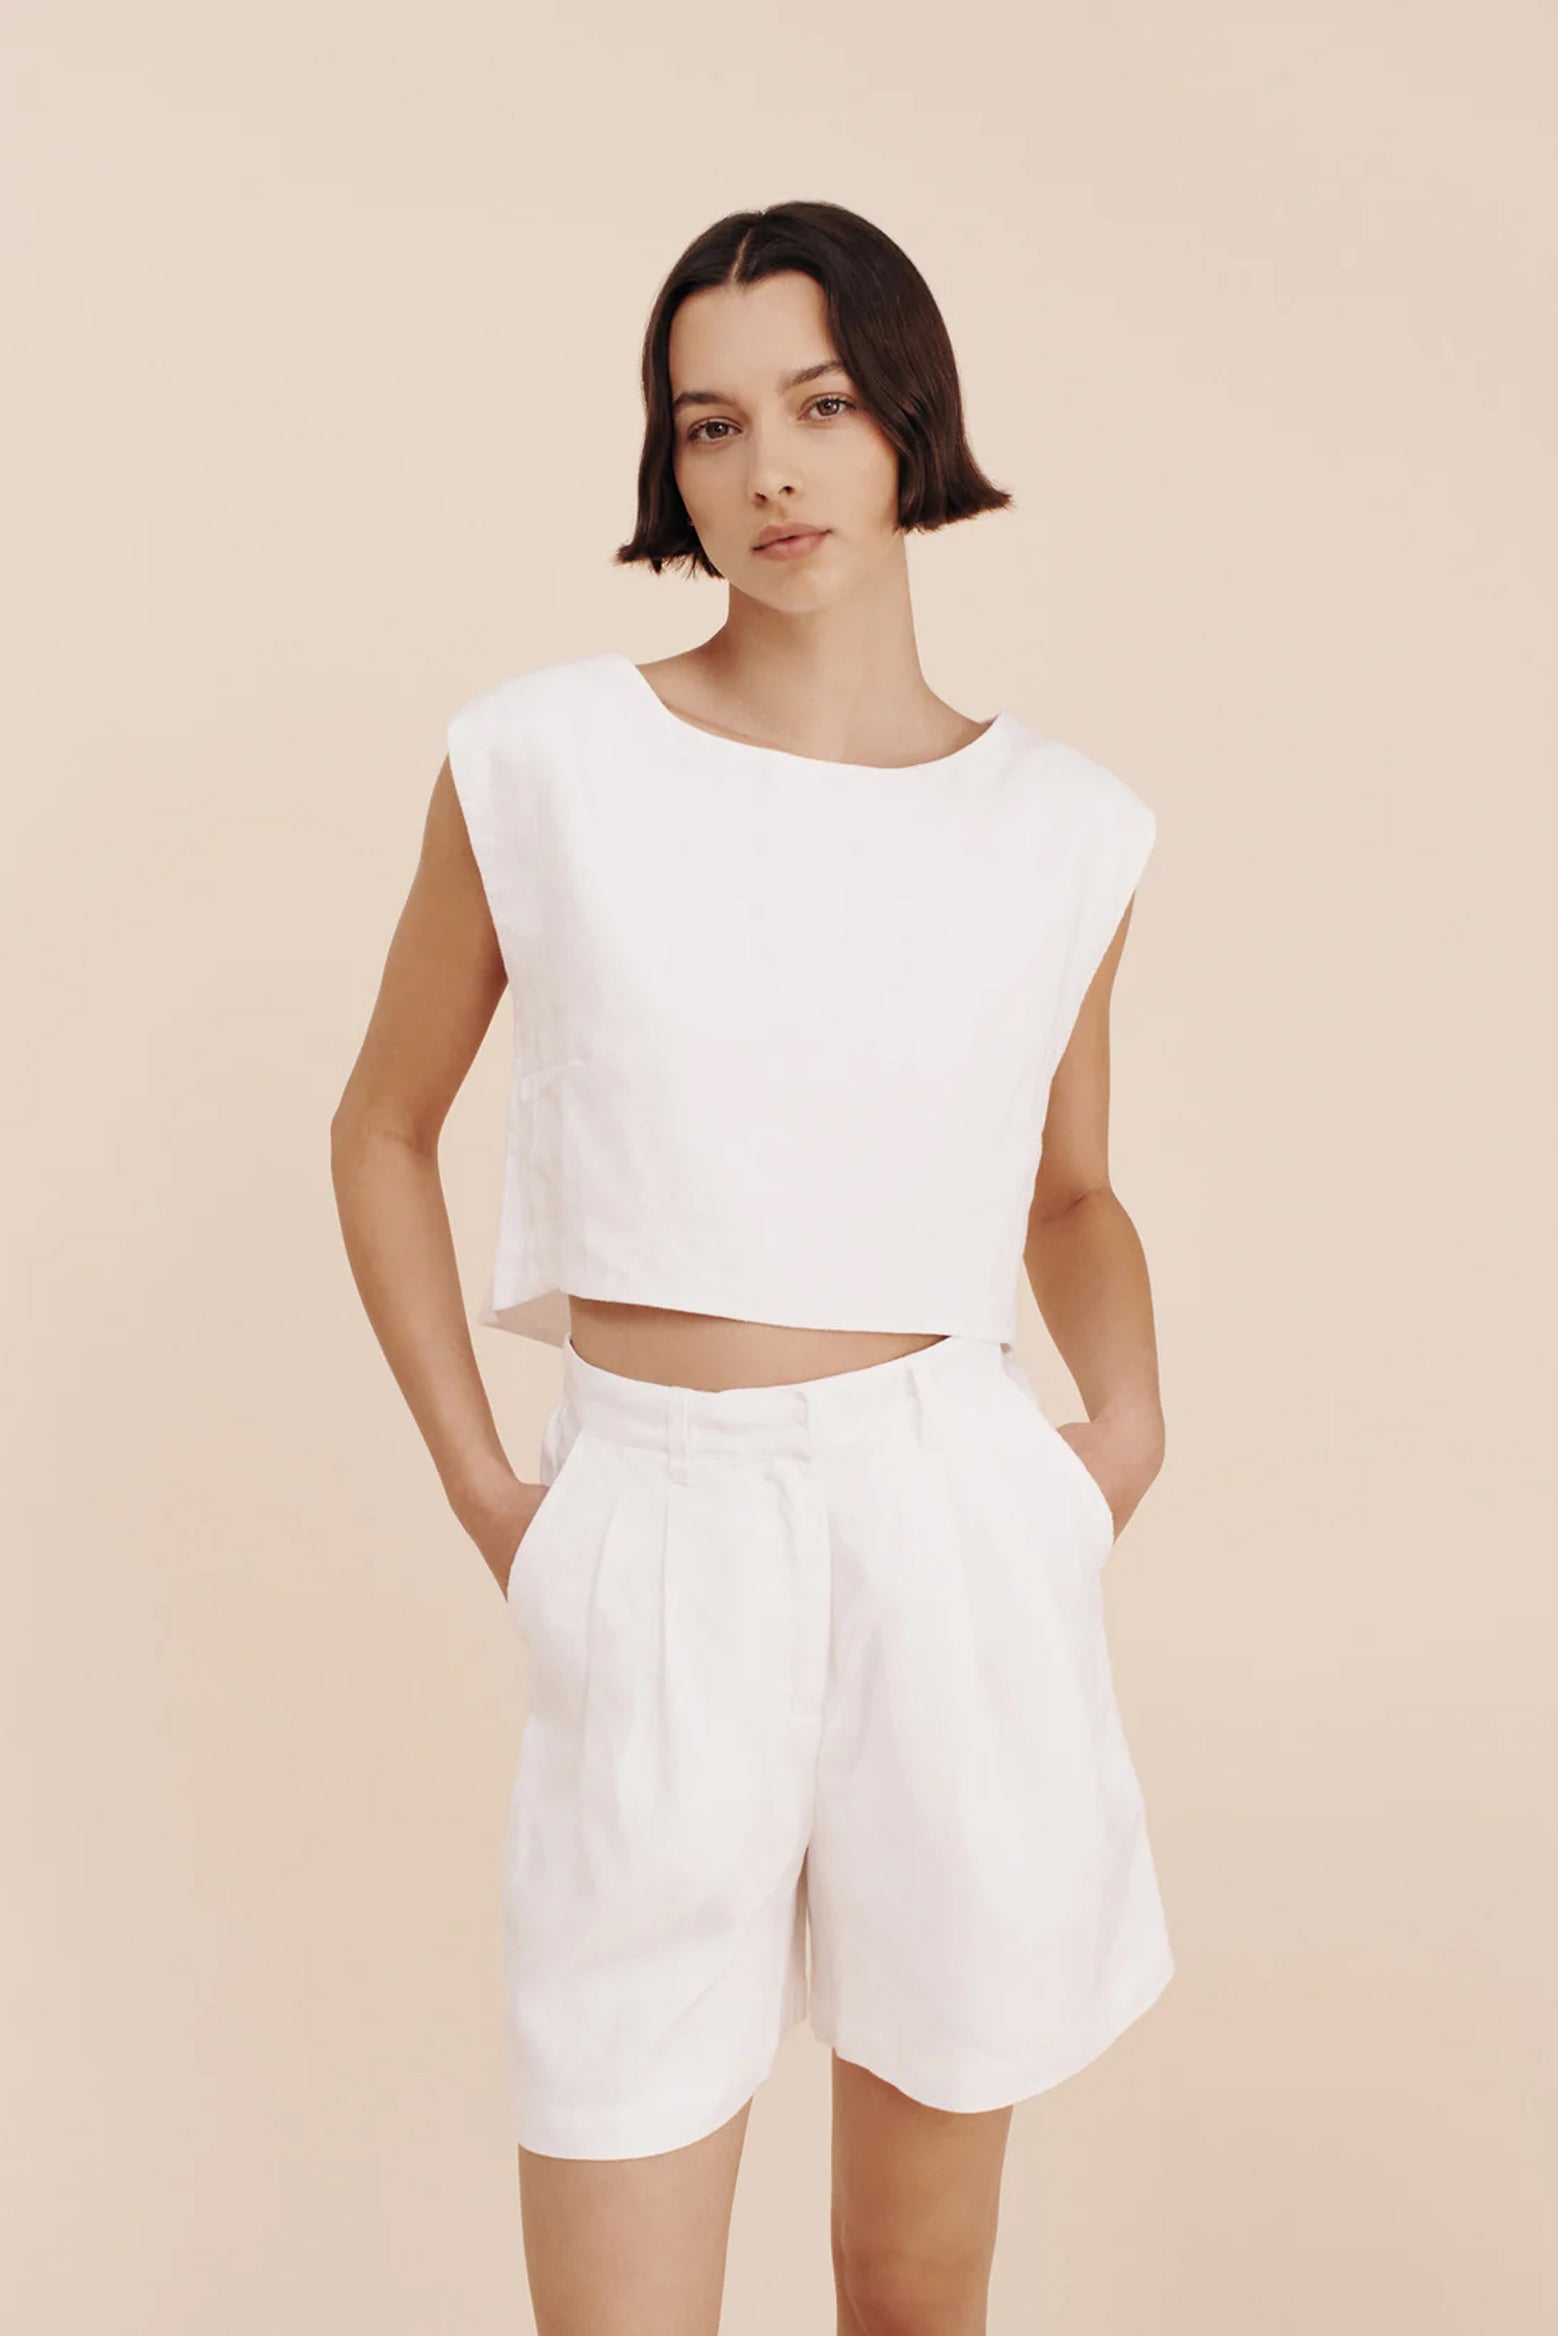 Posse Marchello Short in Ivory available at The New Trend Australia.